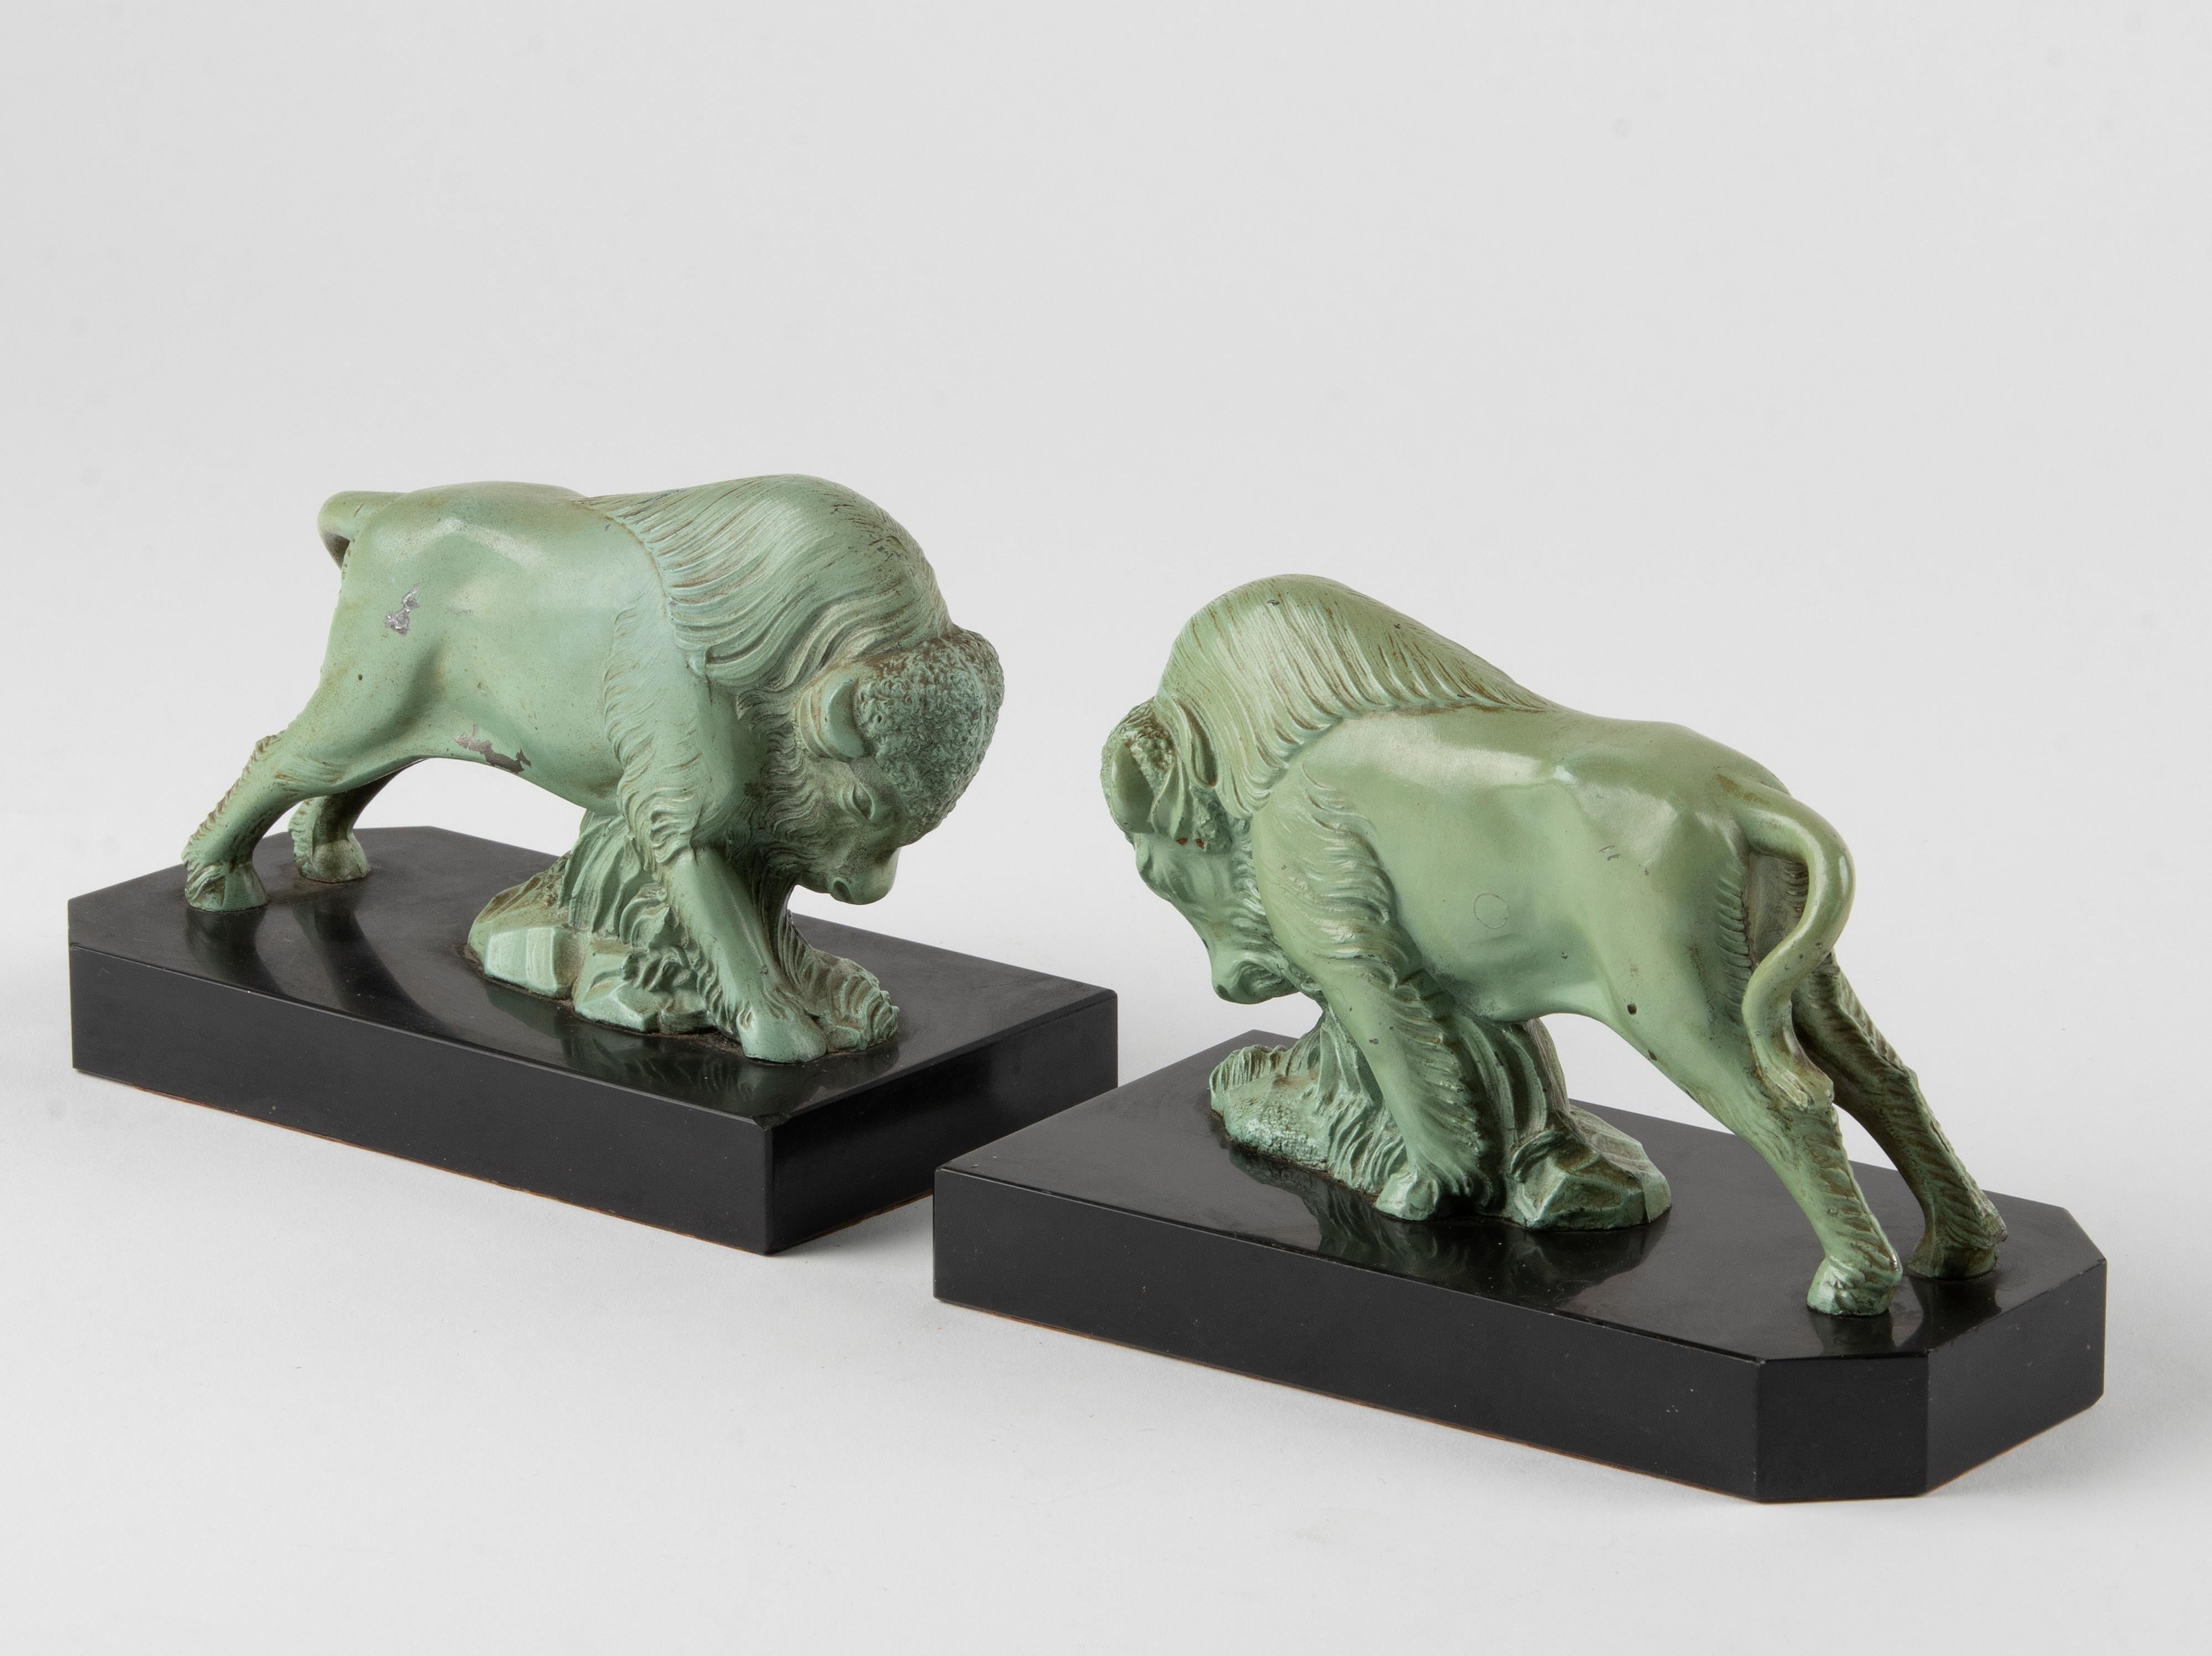 Nice pair of Art Deco period book ends with sculptures of bison. Made of spelter, patinated in a green bronze-like color, on marble bases. Not marked. In good condition with minor signs of age.
 